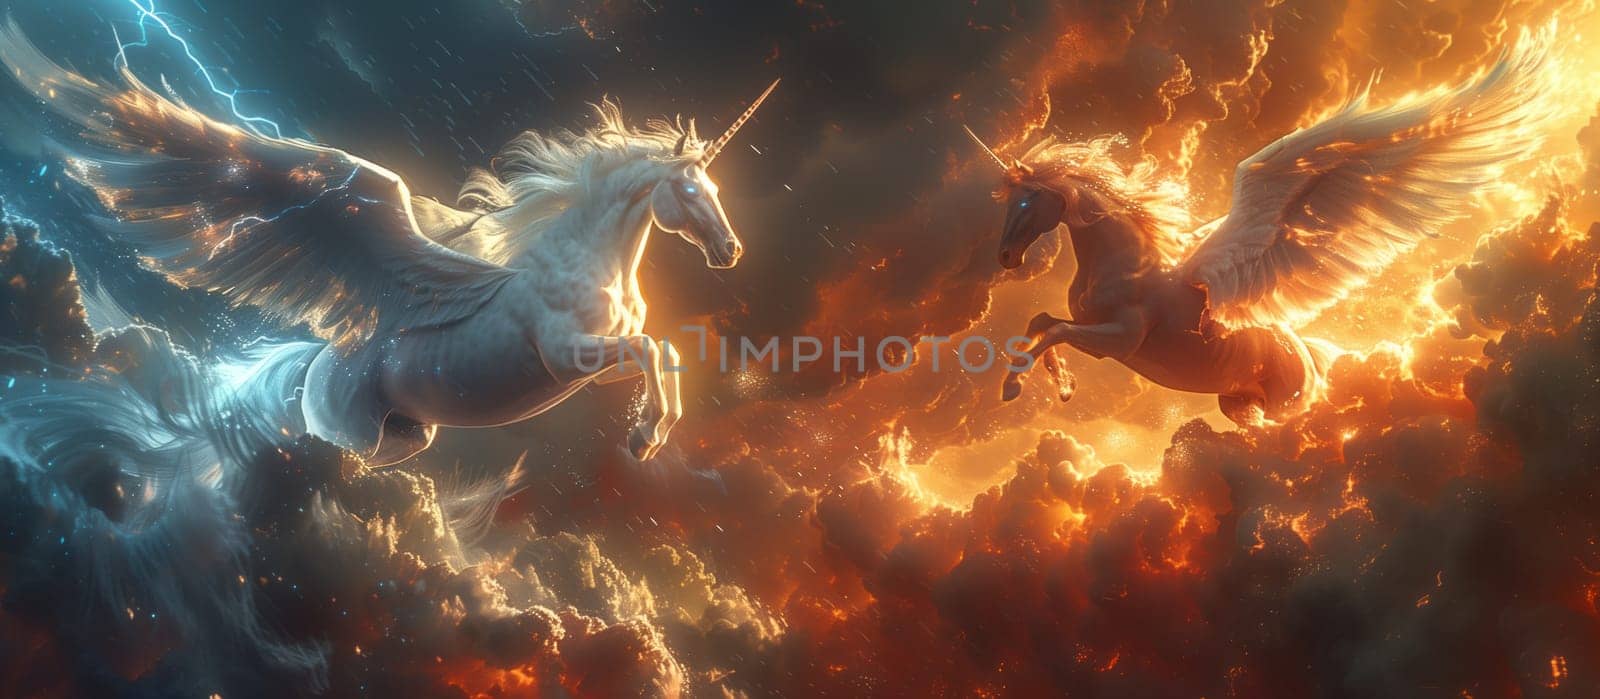 A majestic unicorn and a fiery phoenix soar through the cloudy atmosphere, painting the sky with vibrant colors among the cumulus clouds and distant horizon